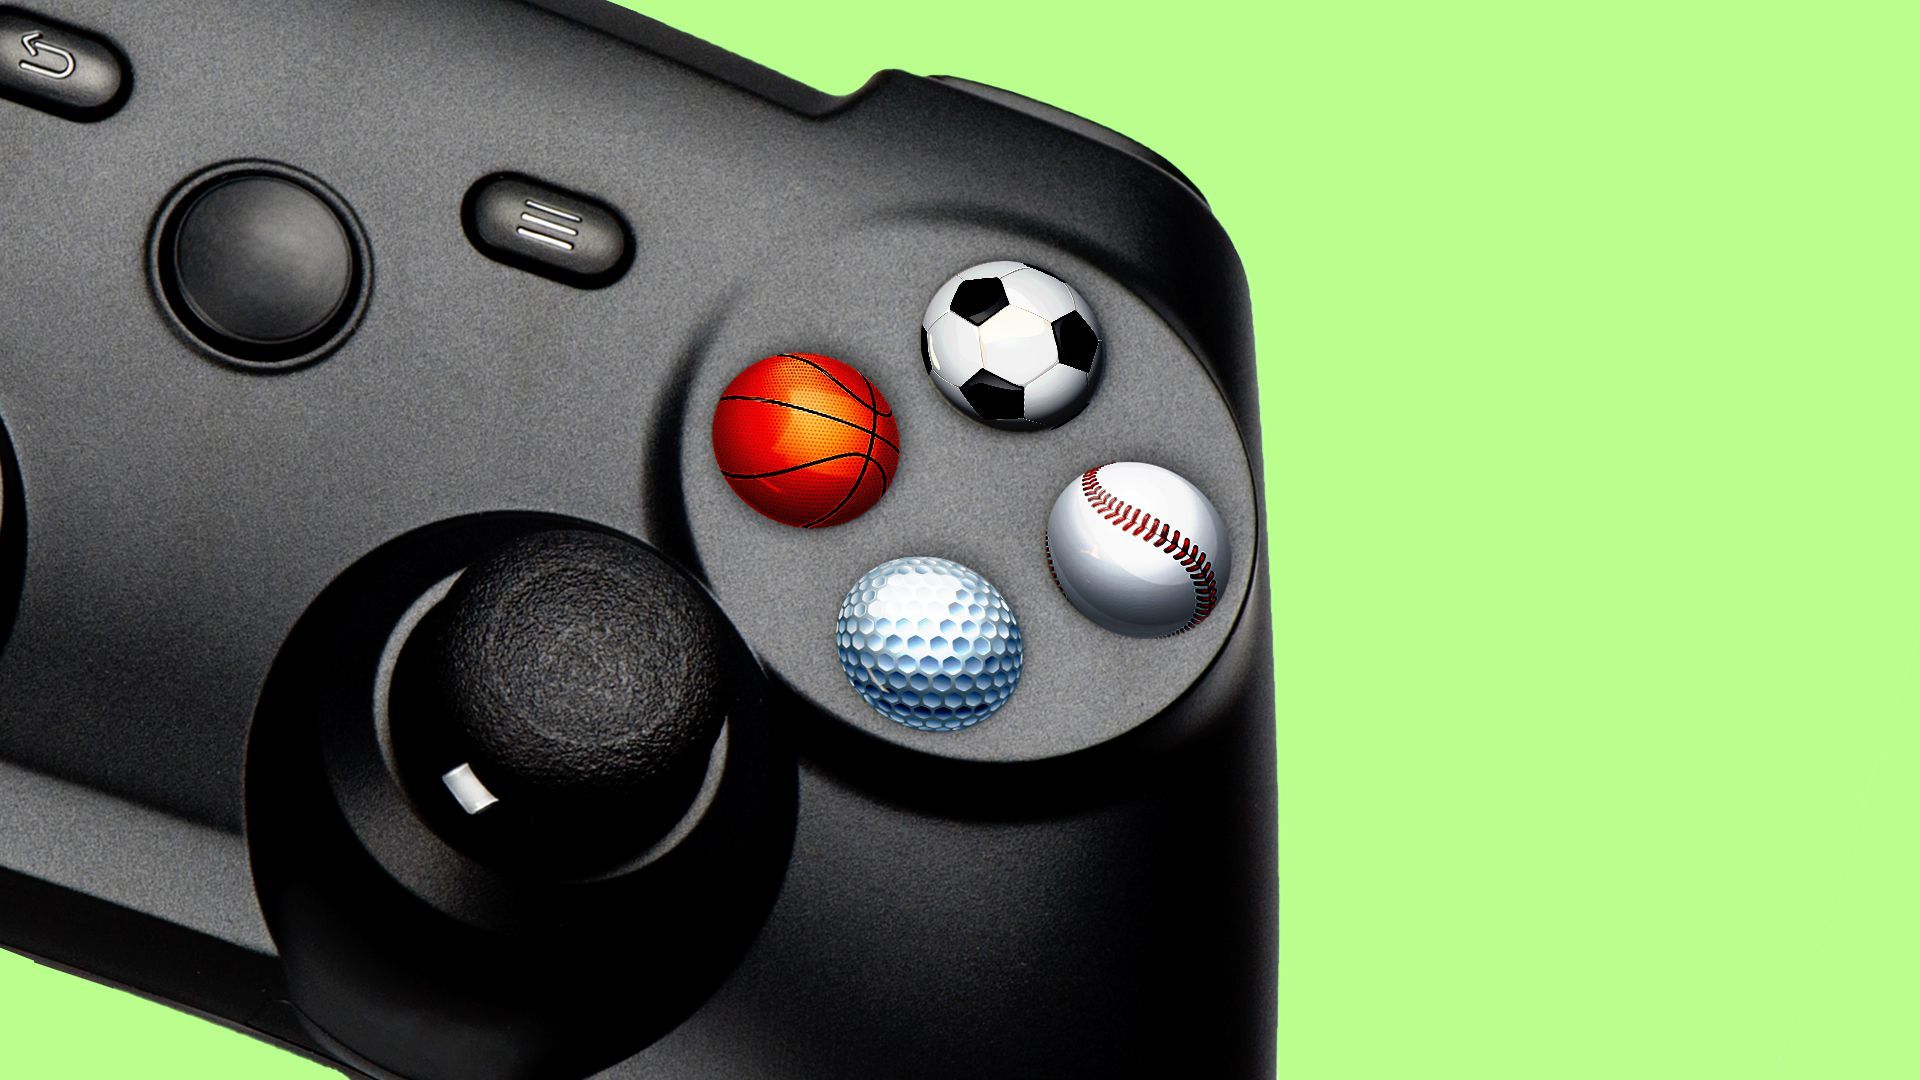 Illustration of a video game controller with sports-related buttons